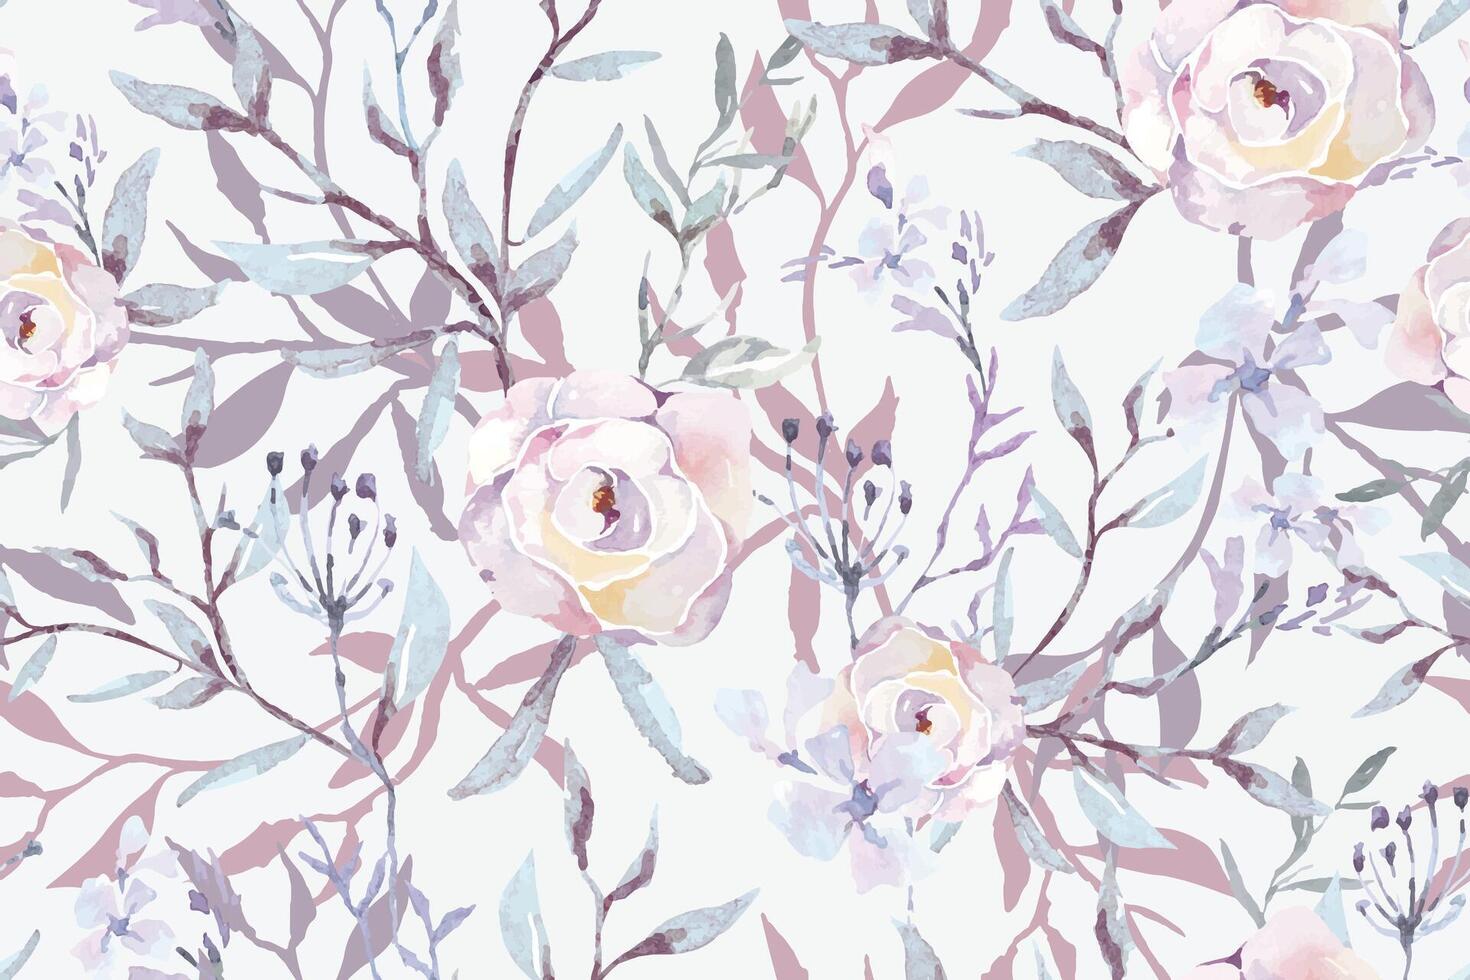 Seamless pattern of blooming flowers, rose and leaves painted in watercolor on abstract background.For fabric luxurious and wallpaper, vintage style.Botanical floral colorful pattern. vector